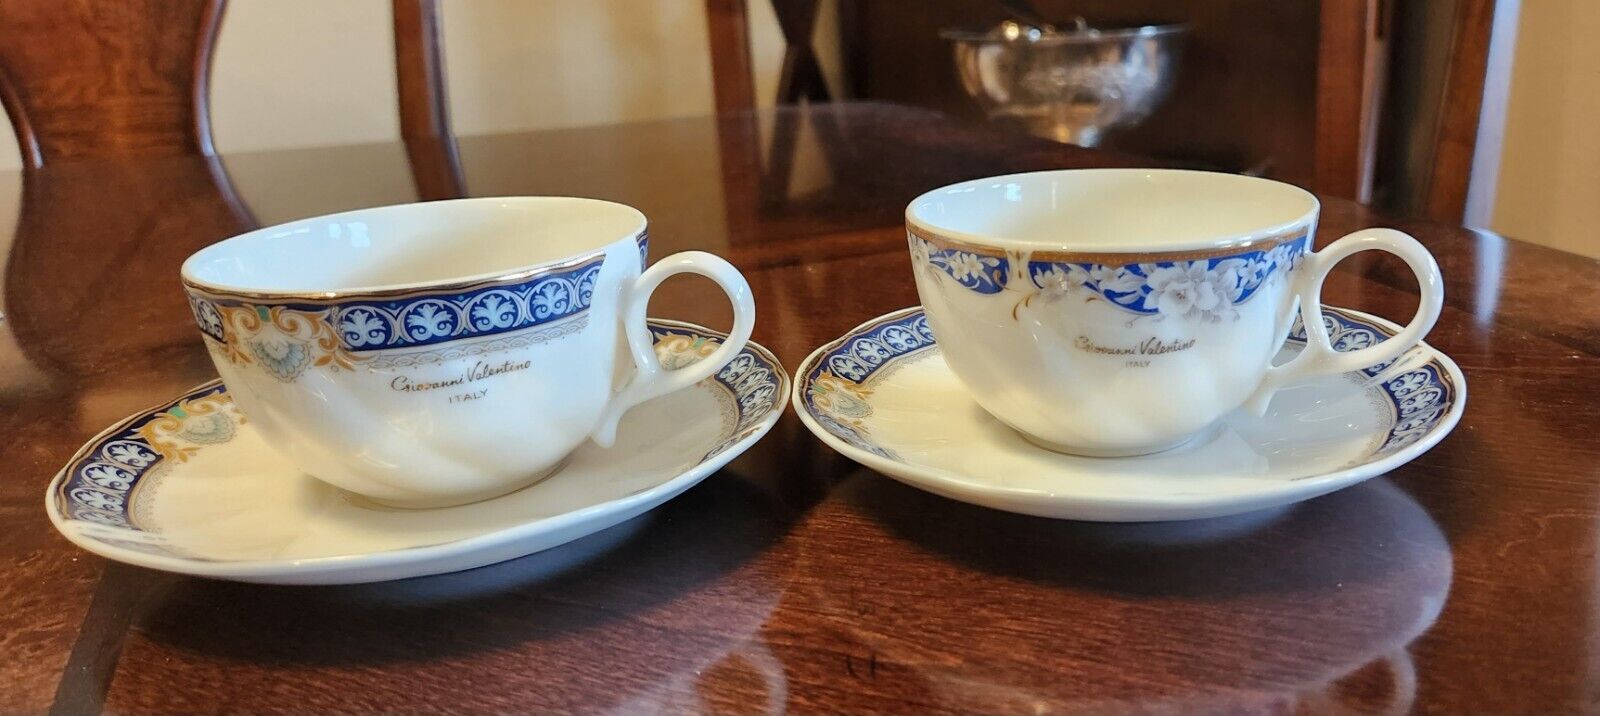 Vintage Giovanni Valentino Teacup and Saucer Set of 2.